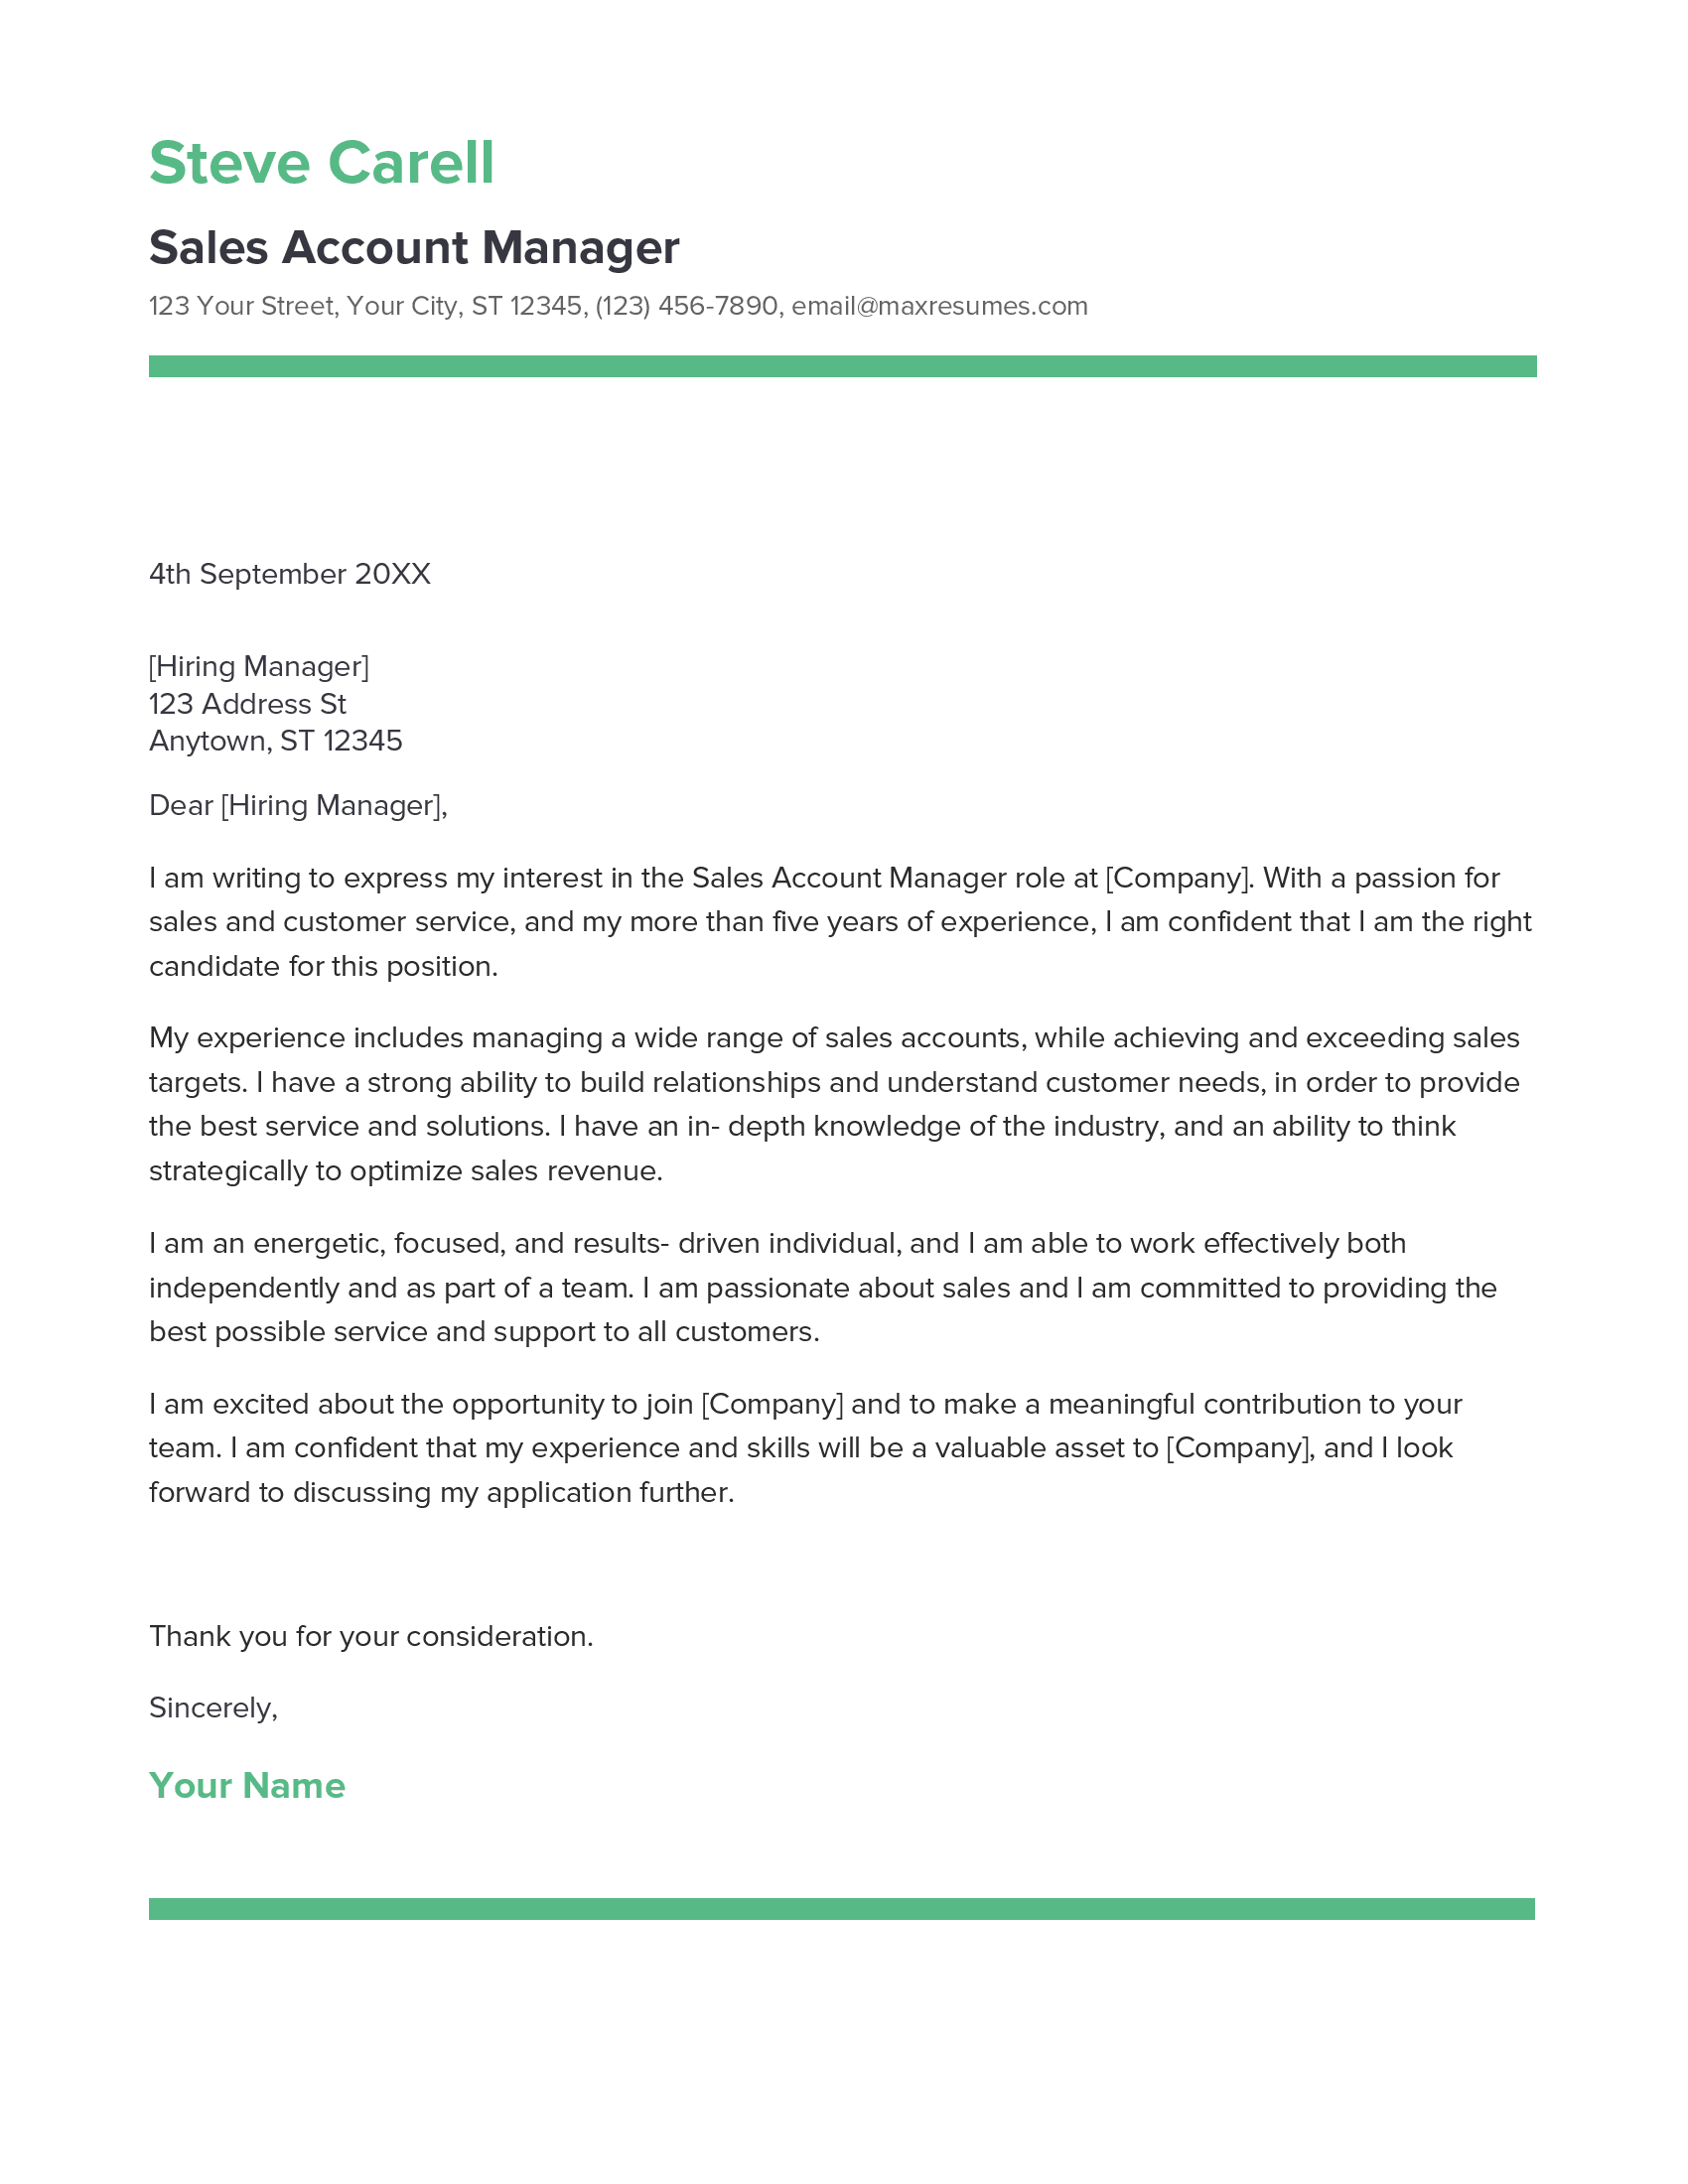 Sales Account Manager Cover Letter Example